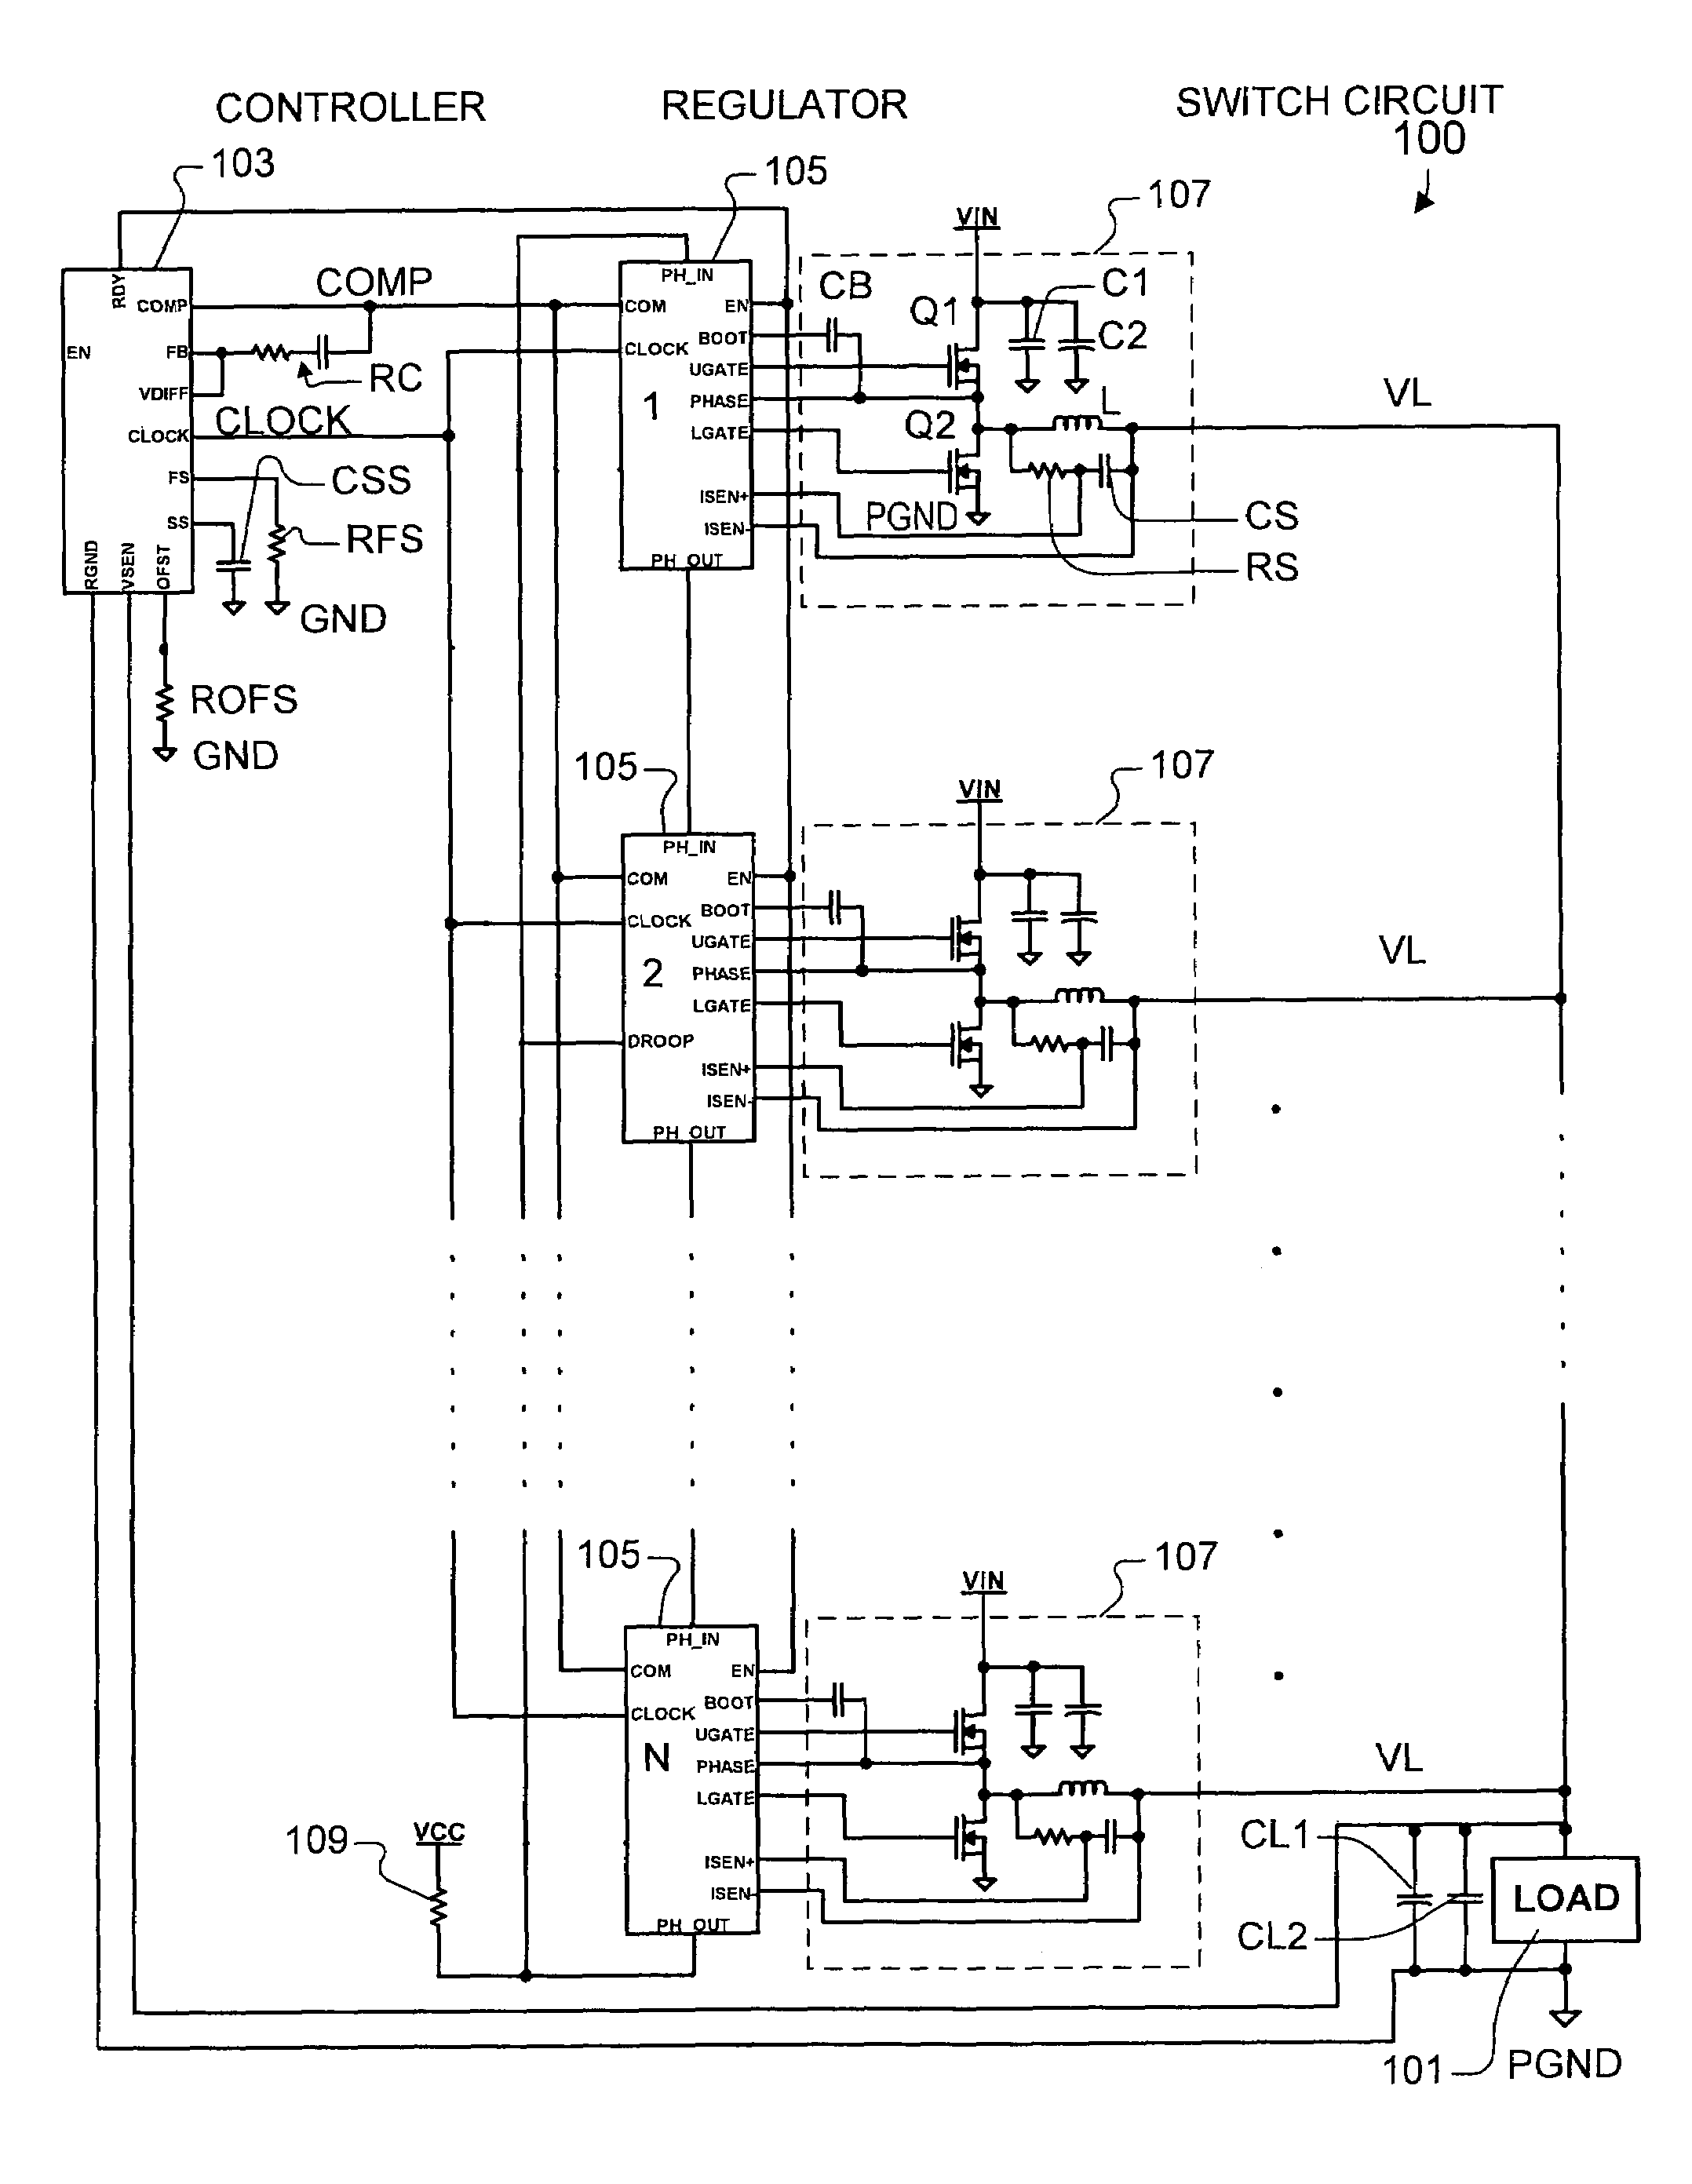 Clocked cascading current-mode regulator with high noise immunity and arbitrary phase count